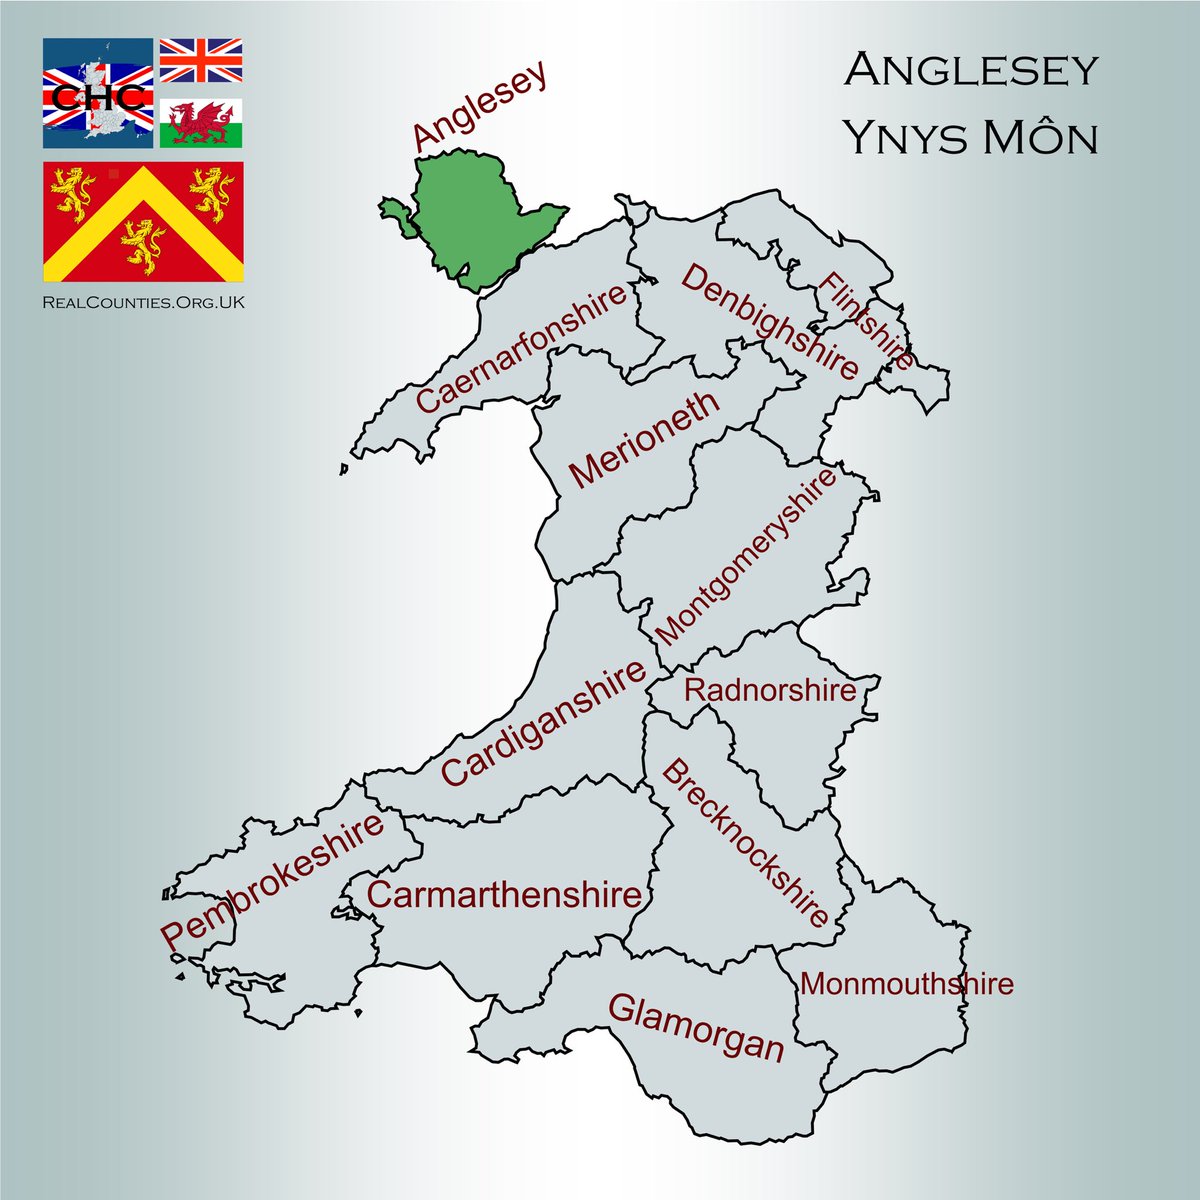 The County of #Anglesey (Ynys Môn) is an island shire off the north-west coast of Wales.

It is separated from the mainland of Great Britain by the Menai Strait.

Anglesey is the largest Welsh county, and the only one without mountains.

🇬🇧 #HistoricCounties | #RealCounties 🏴󠁧󠁢󠁷󠁬󠁳󠁿